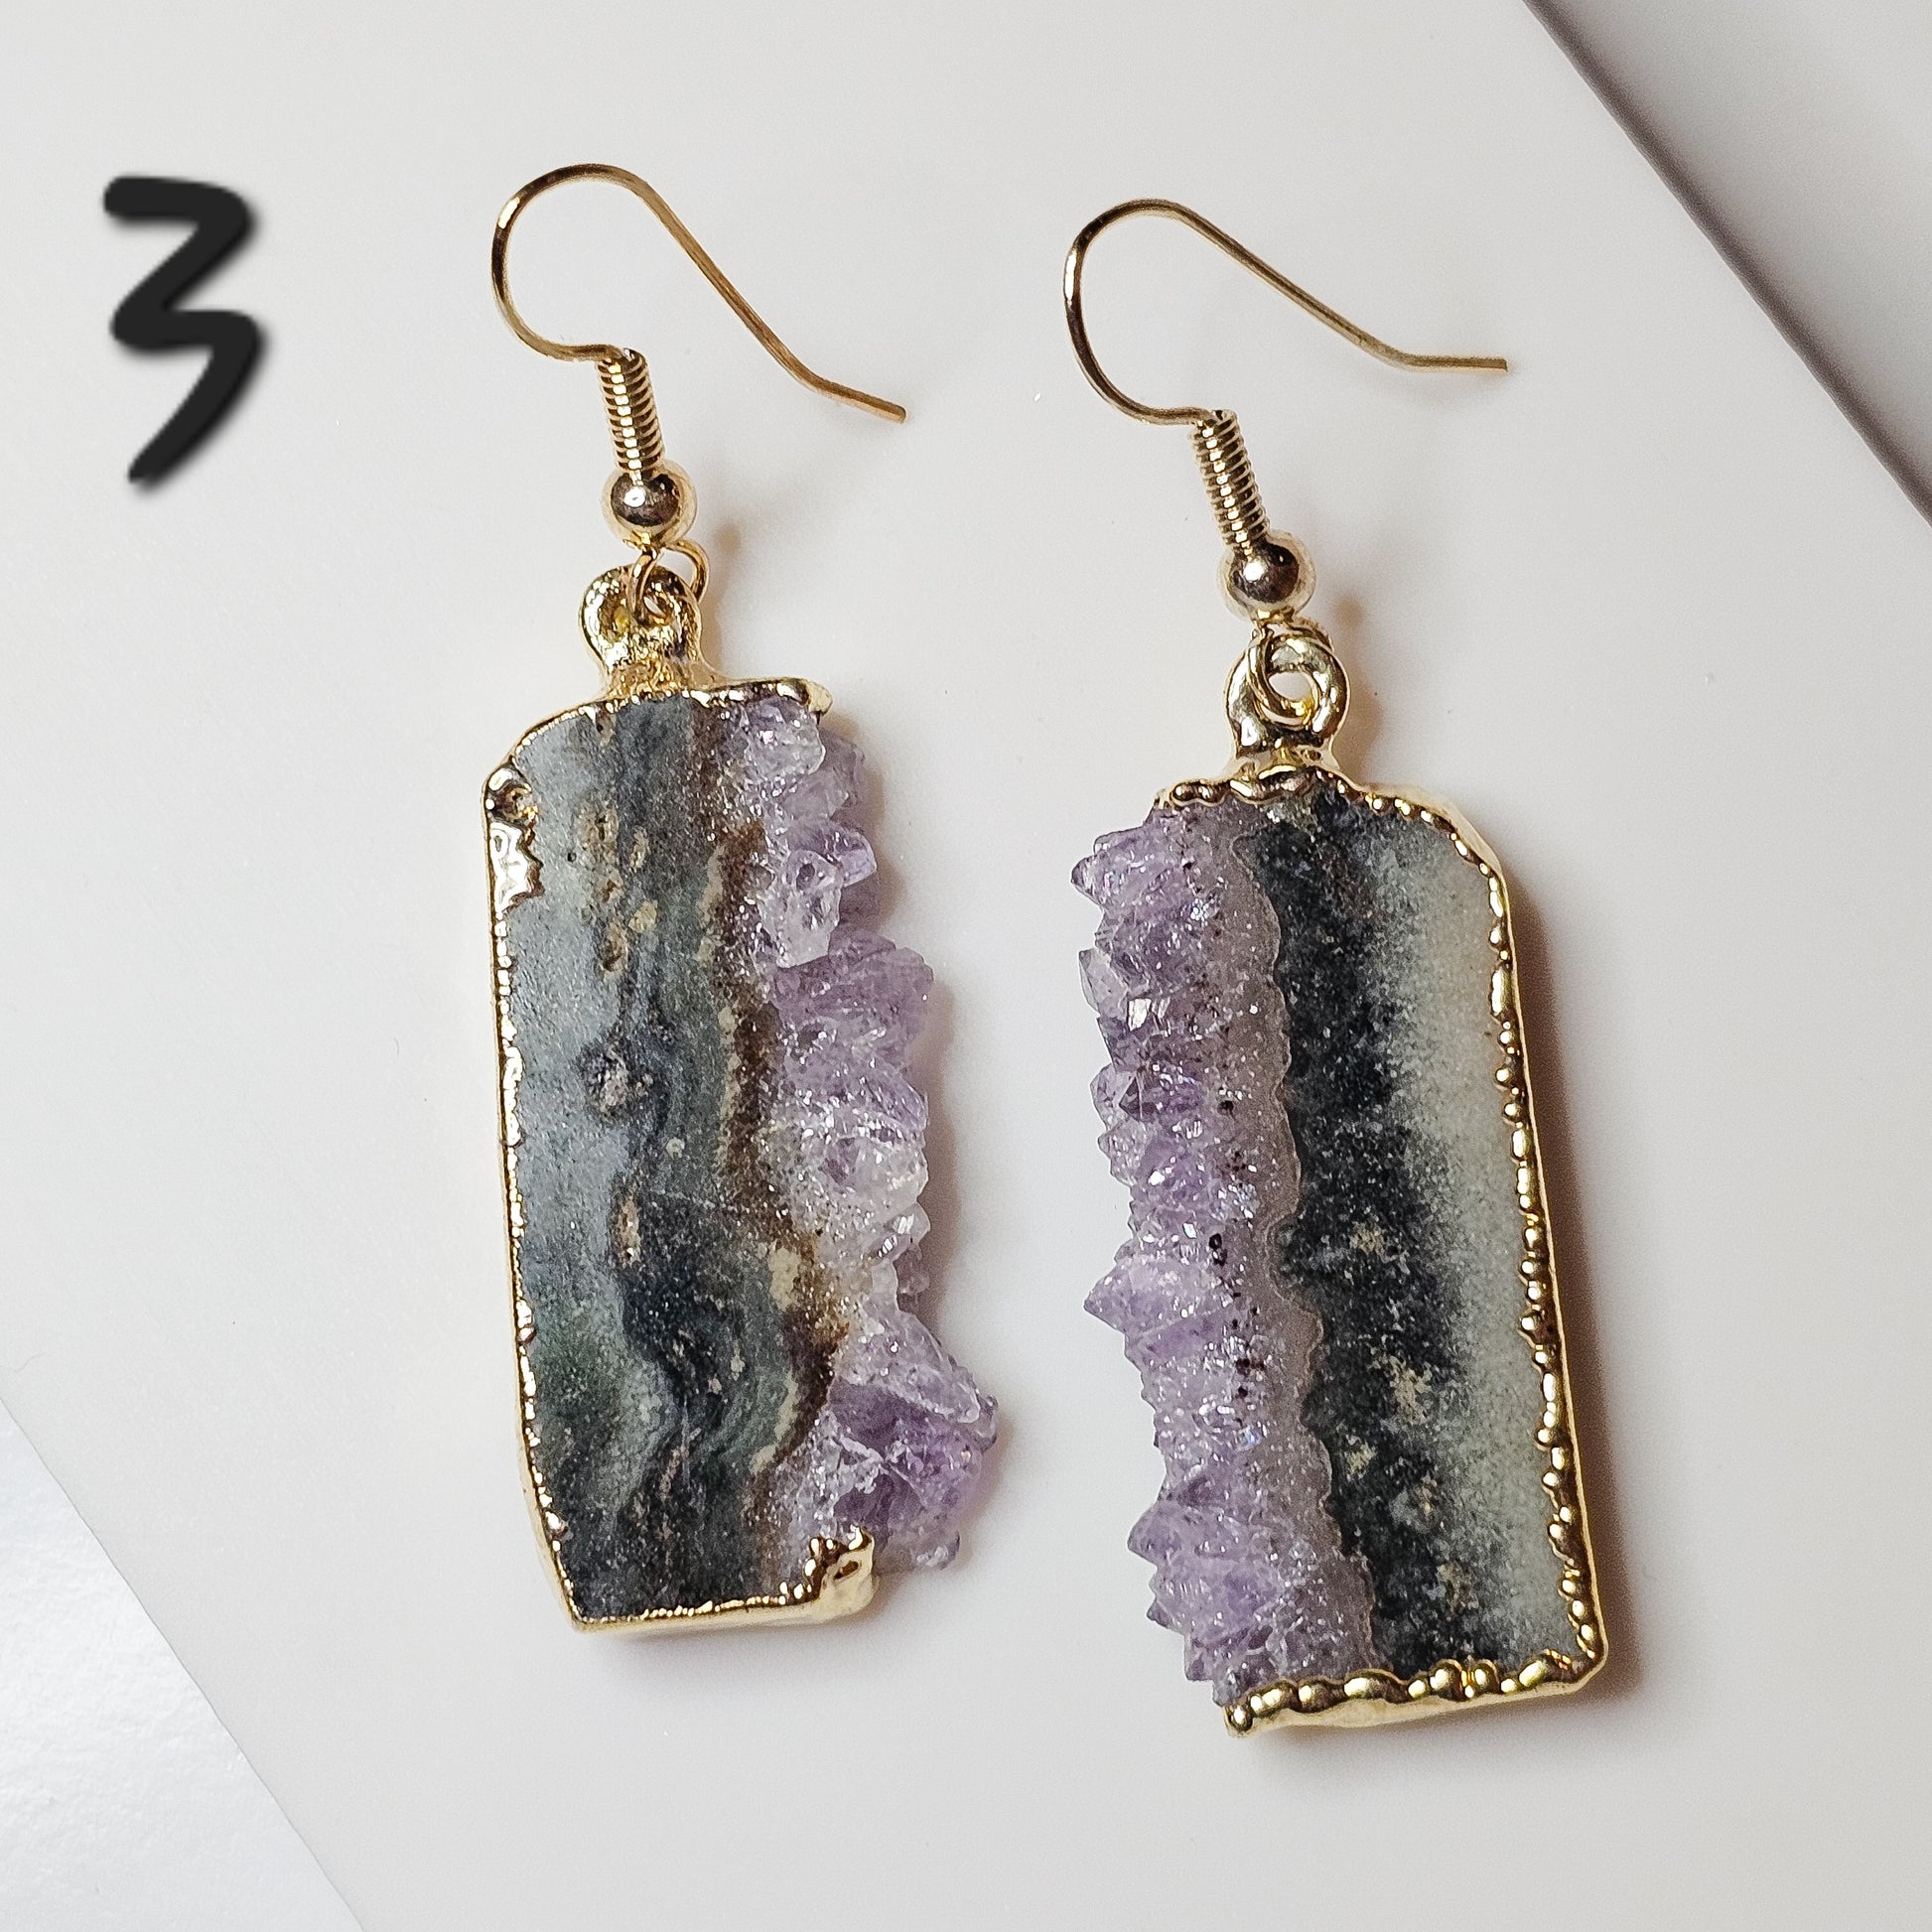 Brazilian Amethyst Stalactite 18k gold plated earrings with hypo-allergenic ear wires.